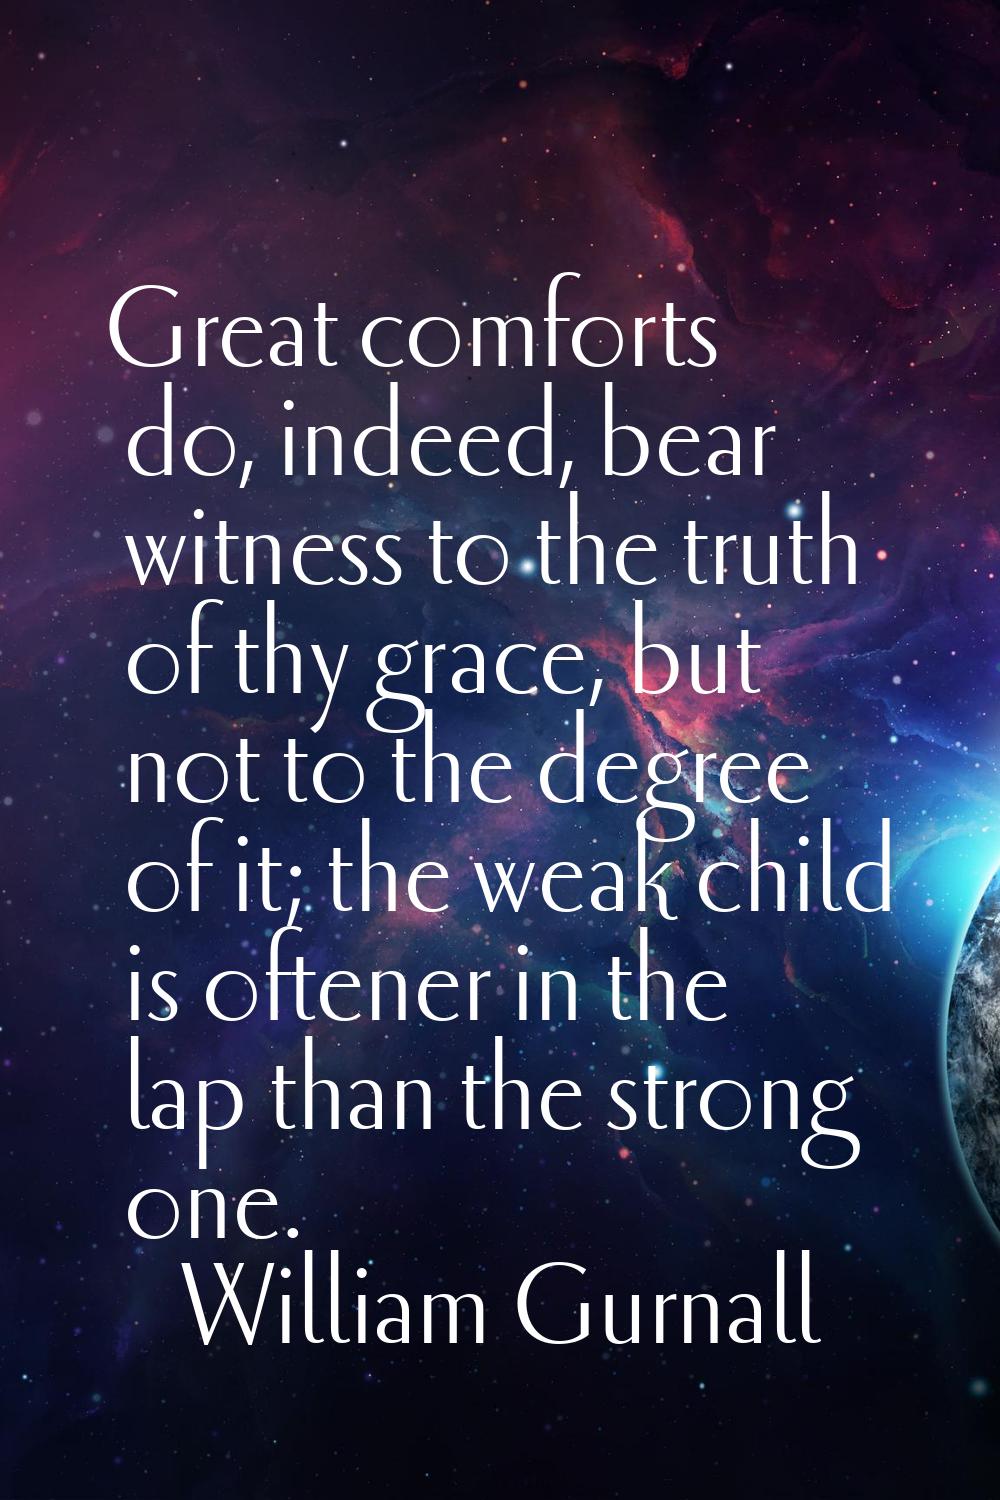 Great comforts do, indeed, bear witness to the truth of thy grace, but not to the degree of it; the